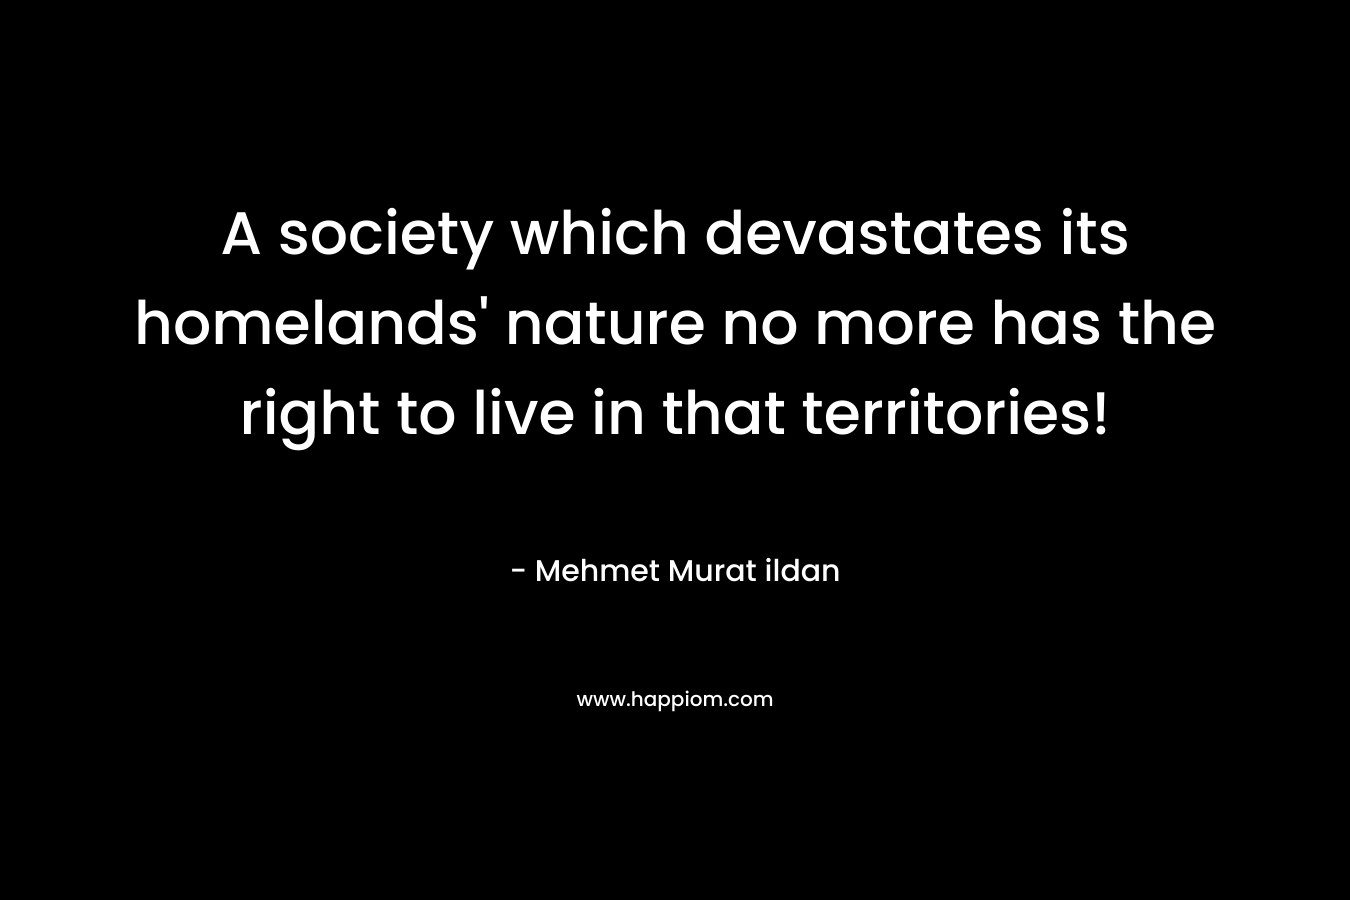 A society which devastates its homelands’ nature no more has the right to live in that territories! – Mehmet Murat ildan